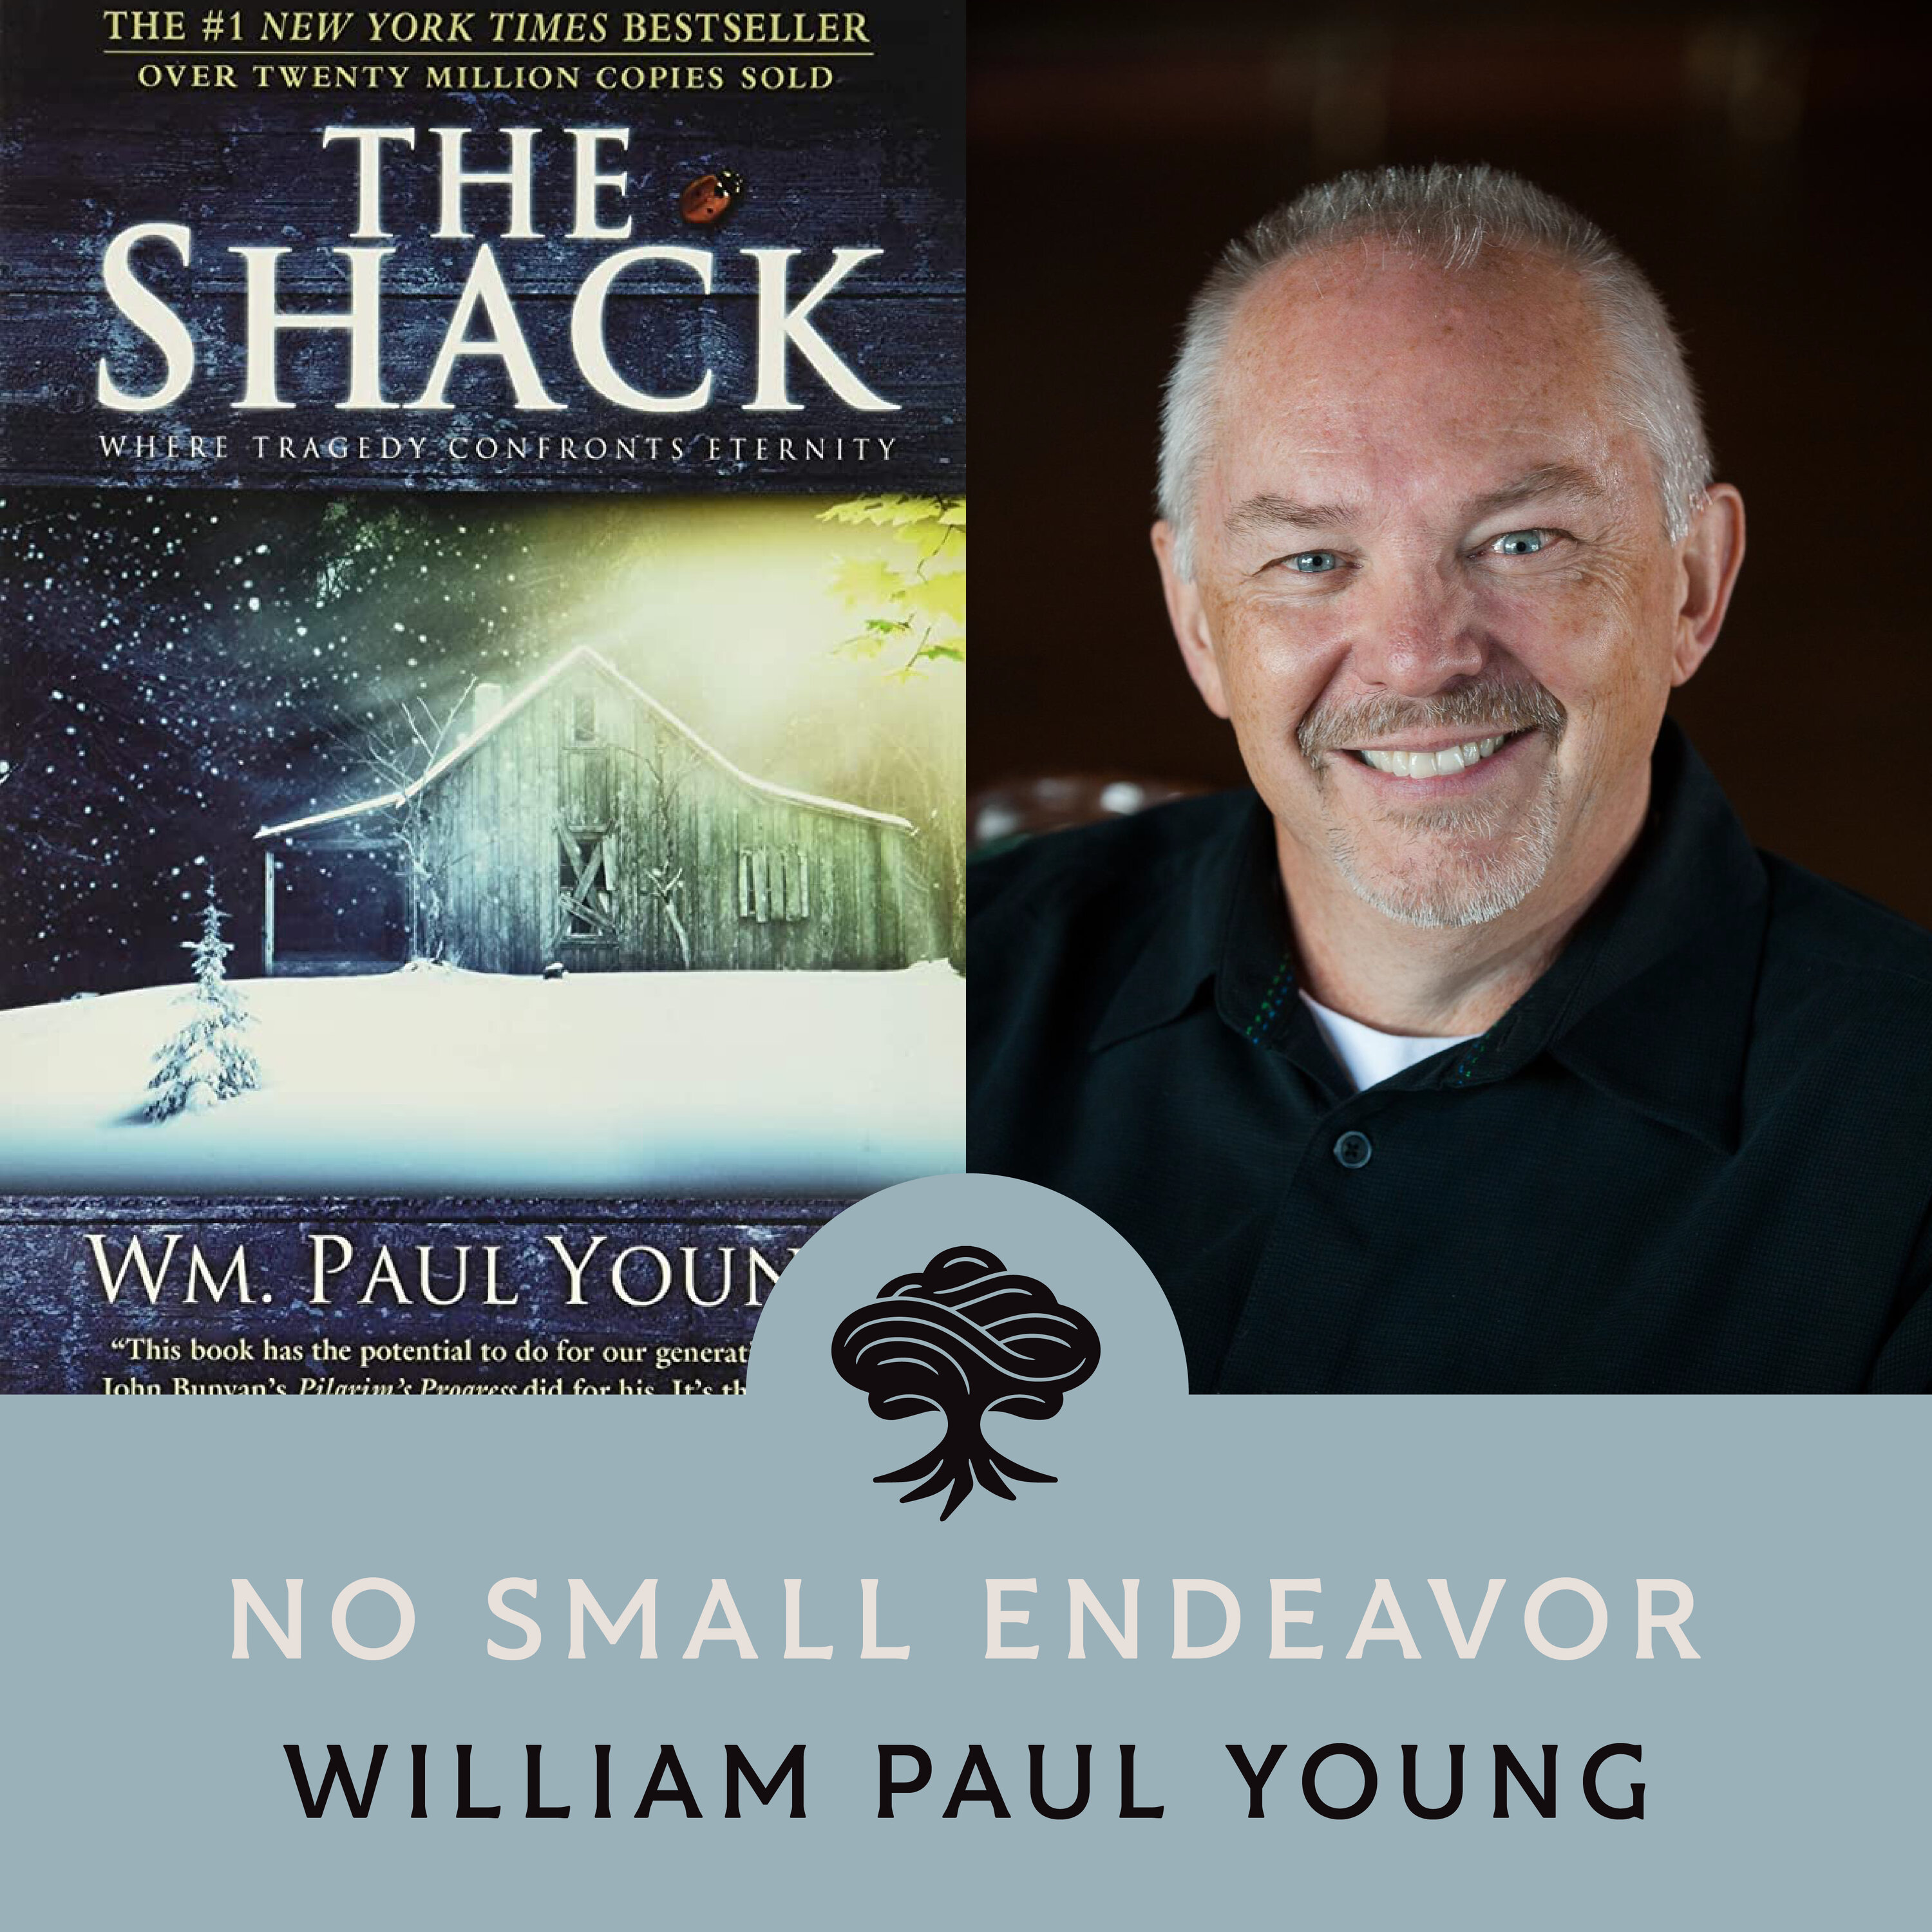 Thumbnail for "93: Author Of The Shack: William Paul Young".